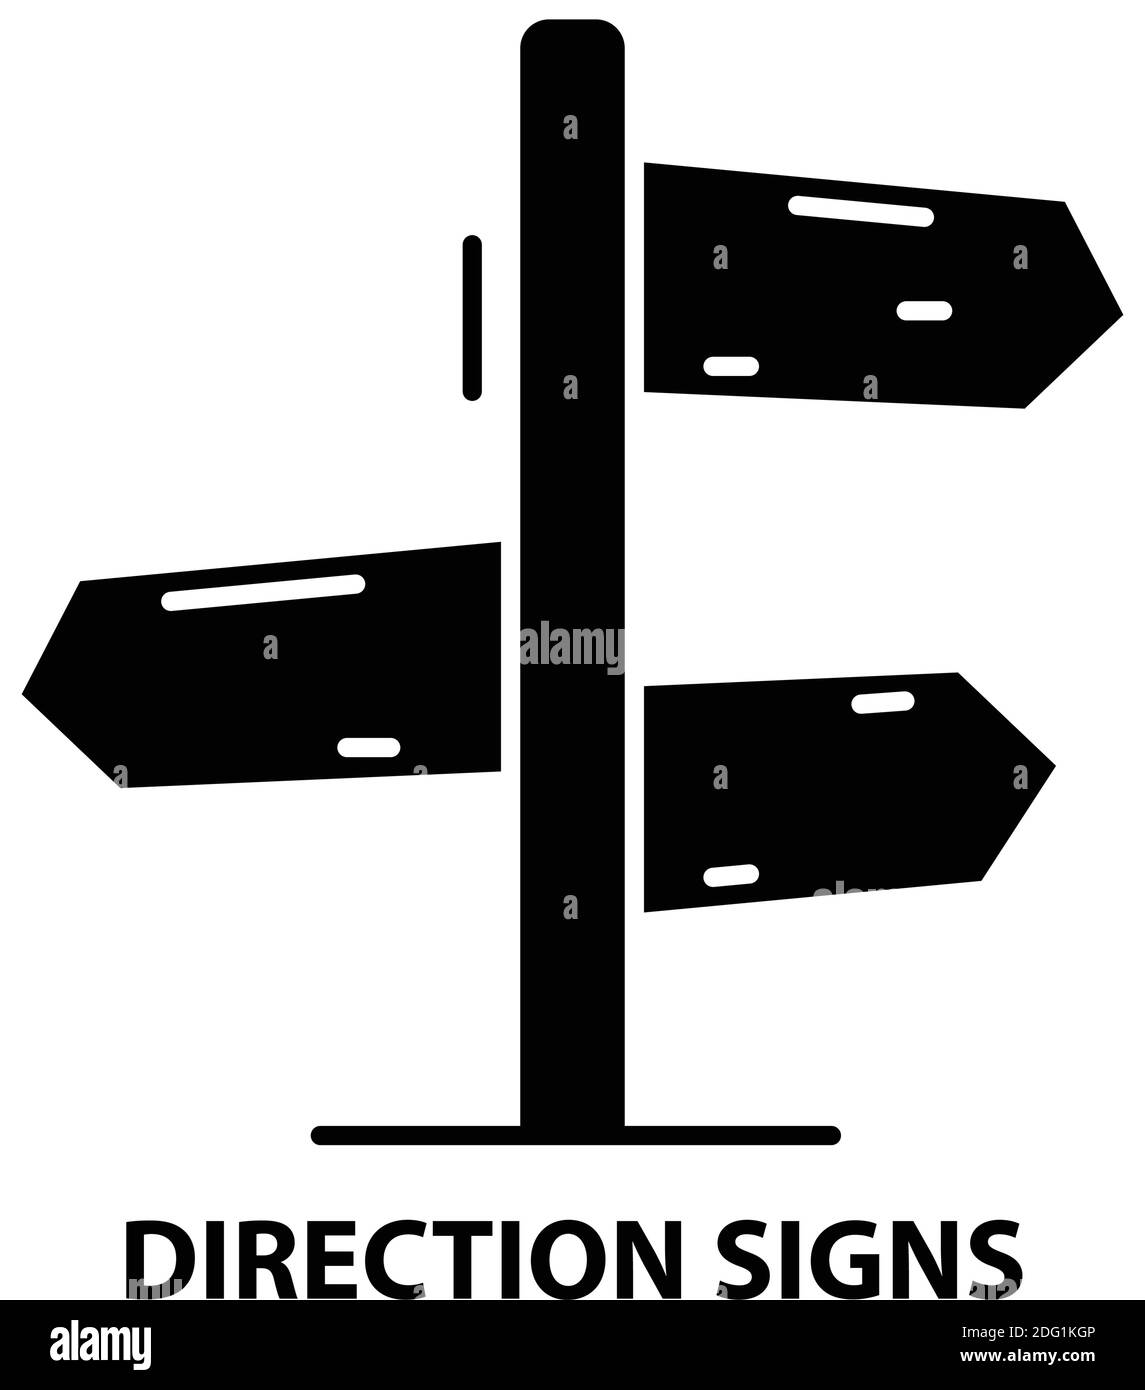 direction signs icon, black vector sign with editable strokes, concept illustration Stock Vector